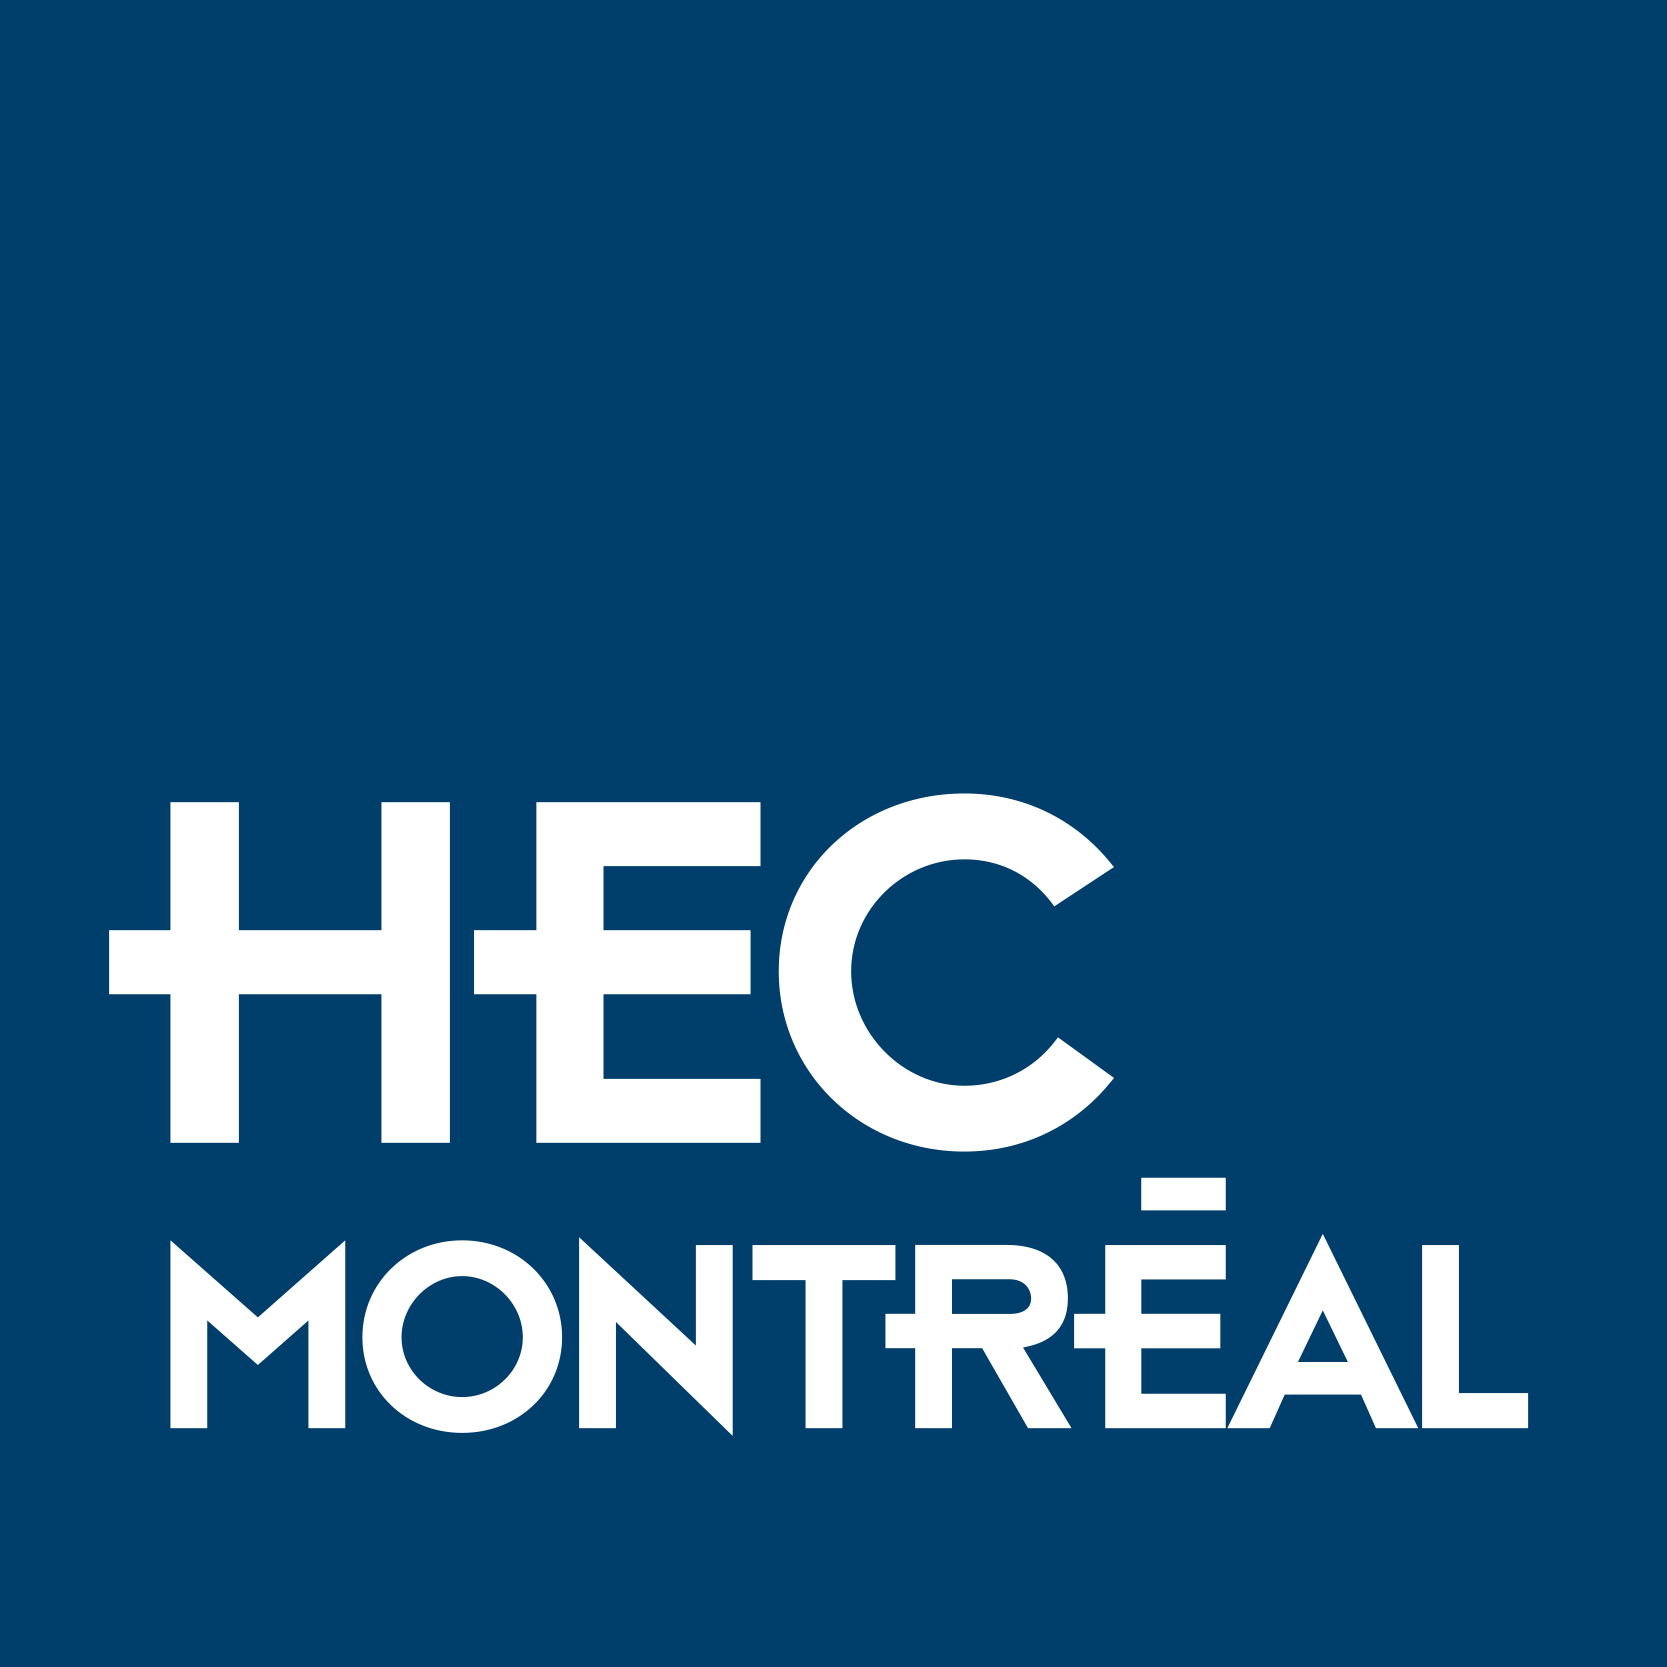 phd management hec montreal